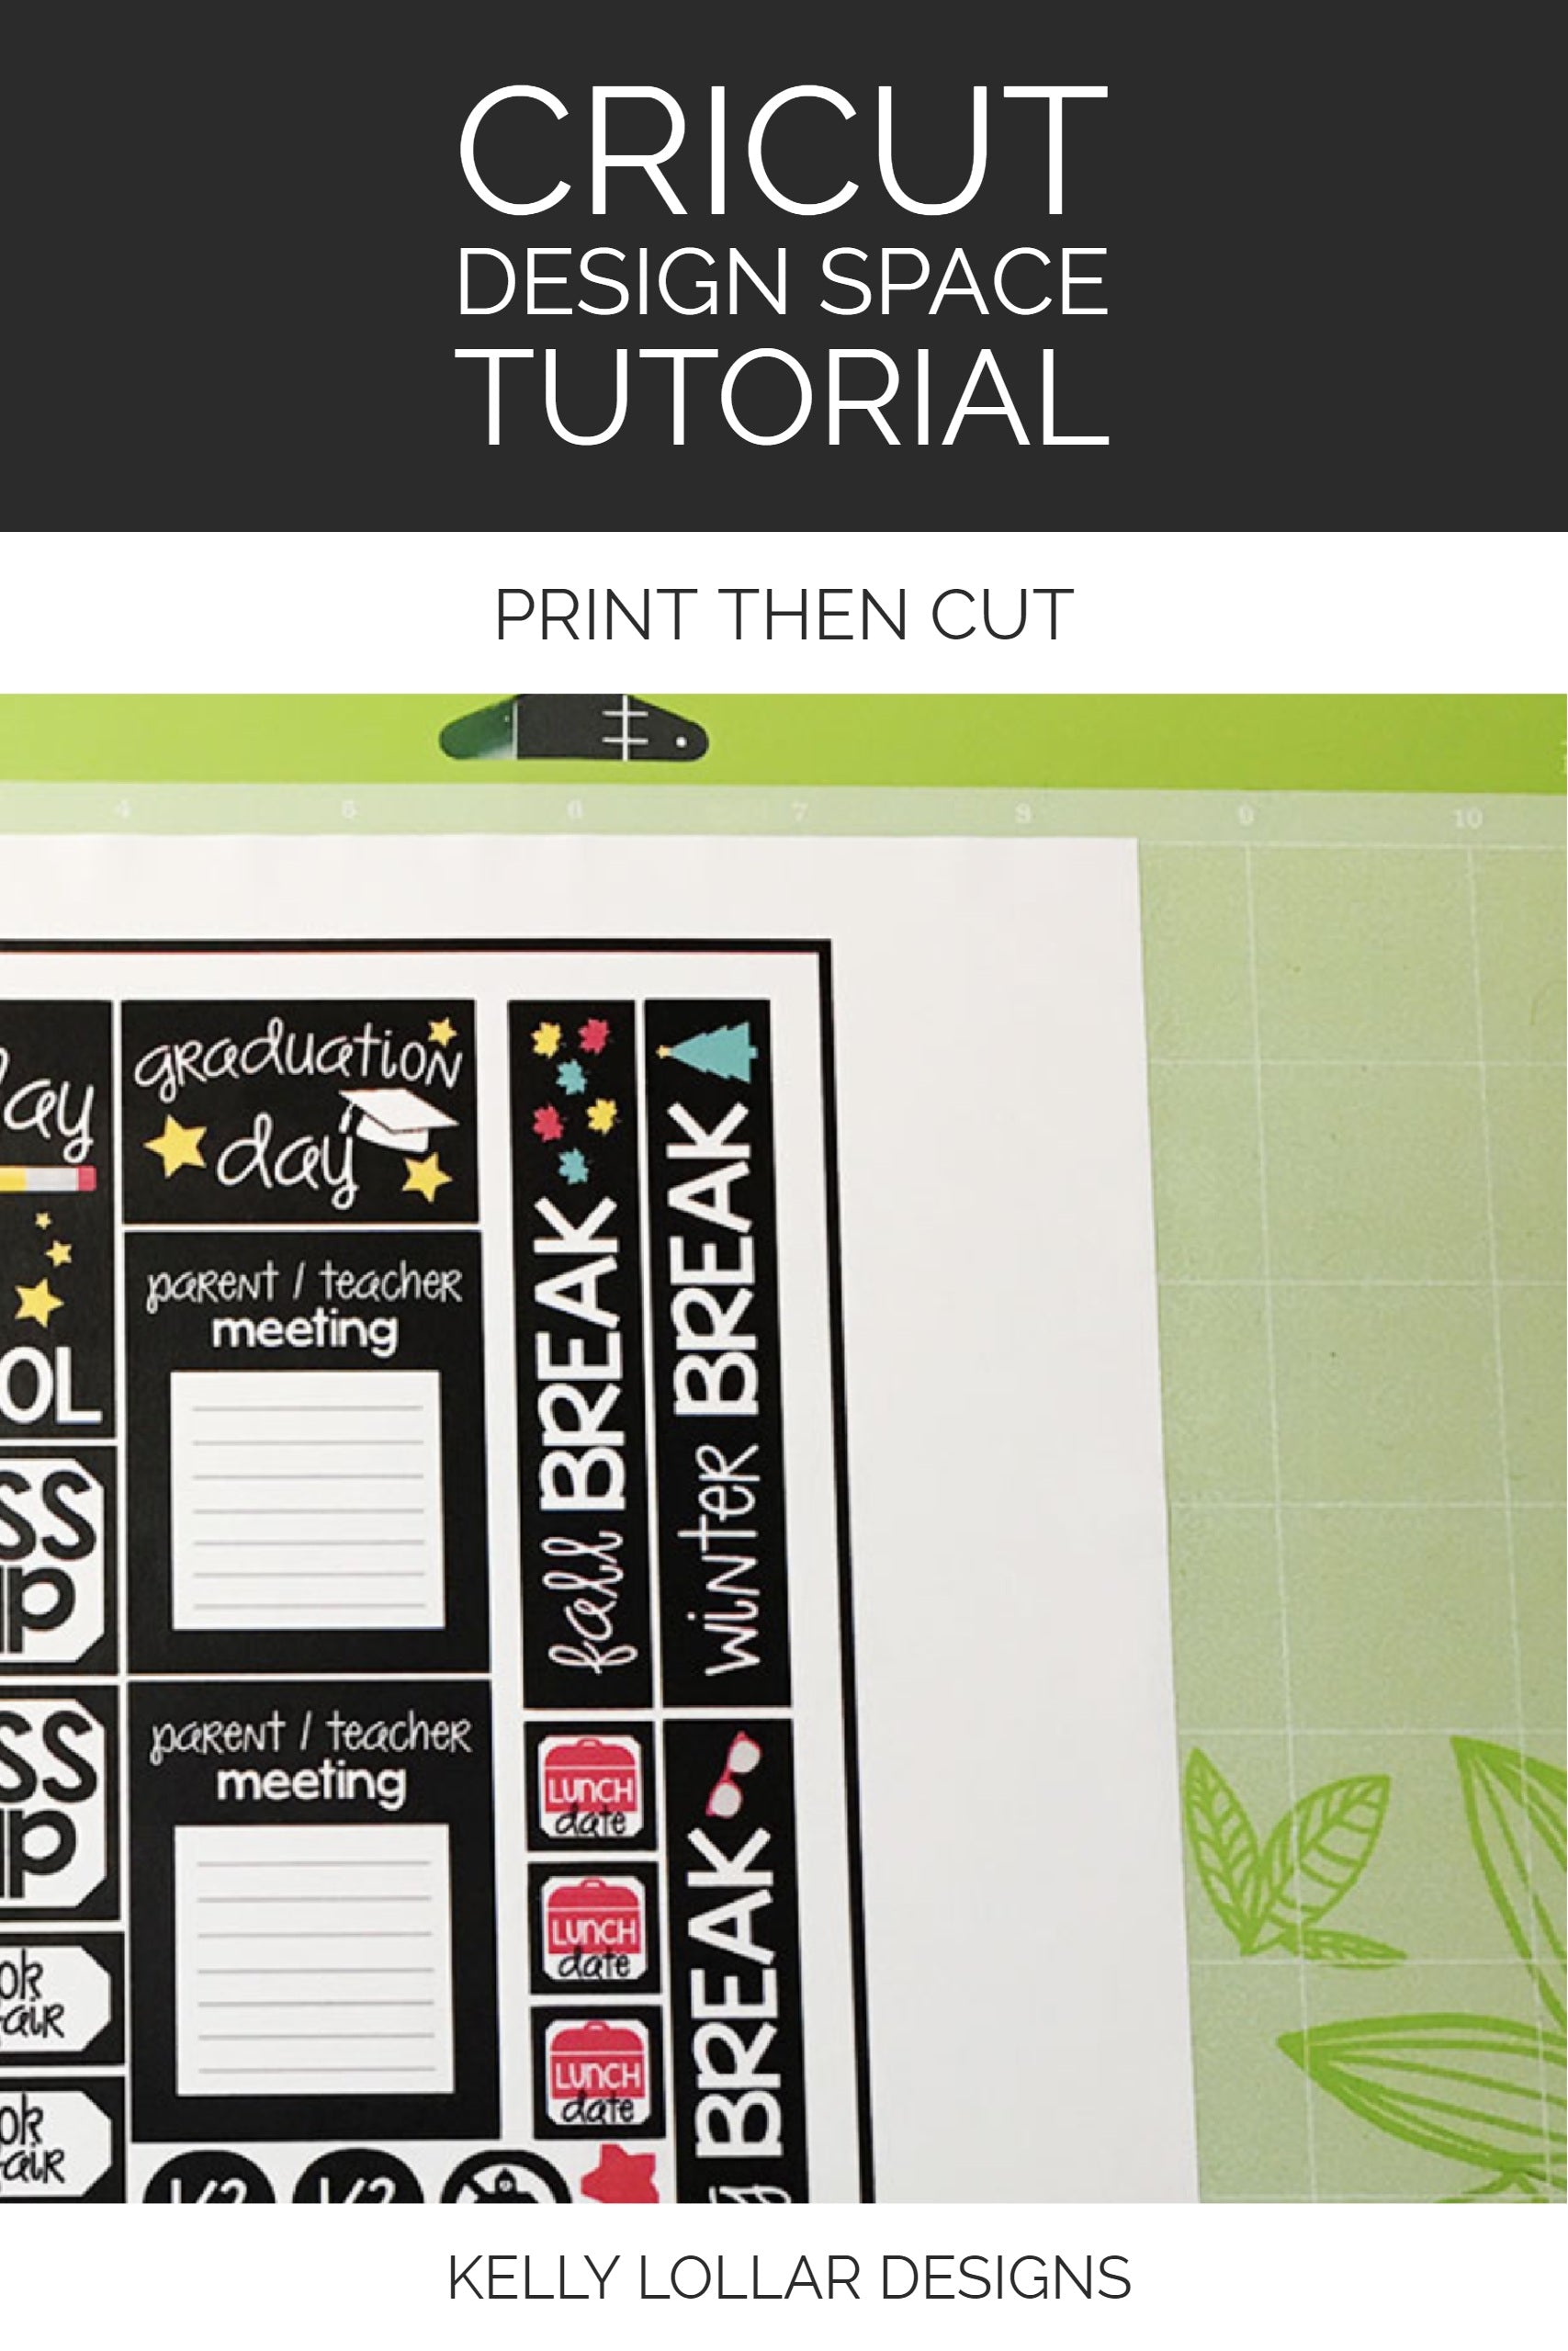 Cricut Design Space Tutorial - Print Then Cut step by step directions with sample file